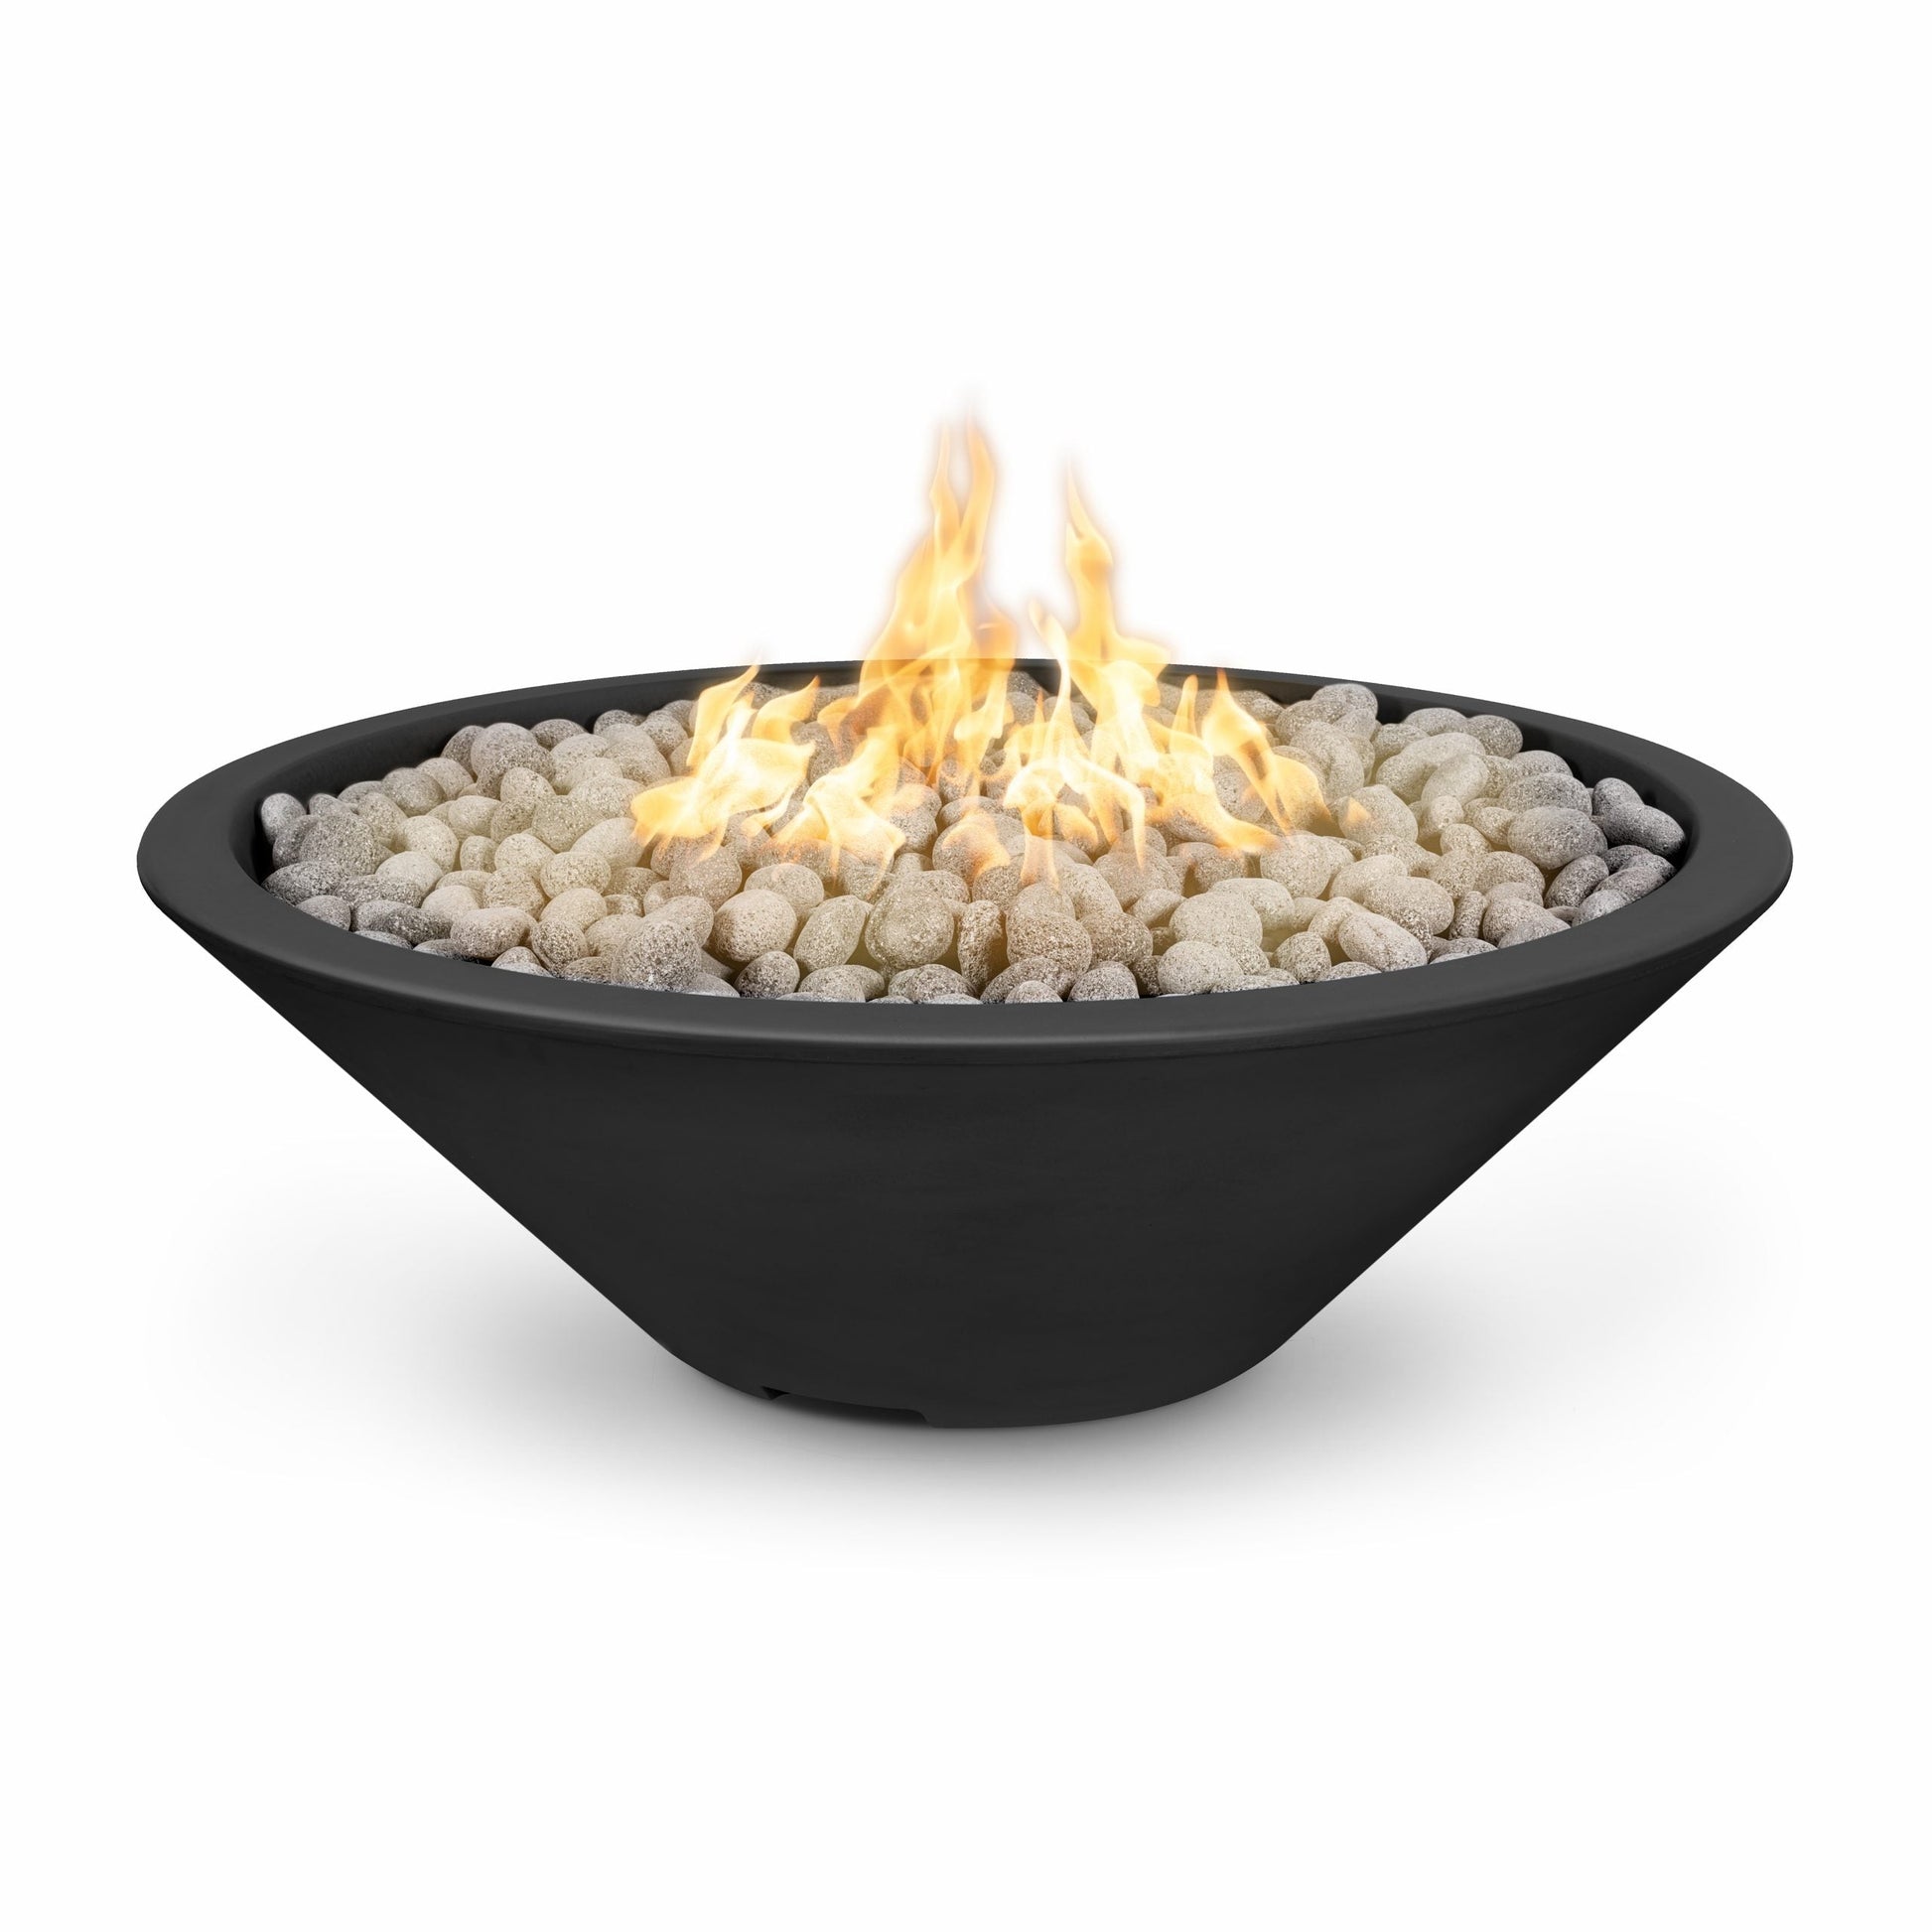 The Outdoor Plus Round Cazo 60" Gray Powder Coated Metal Natural Gas Fire Pit with 110V Electronic Ignition